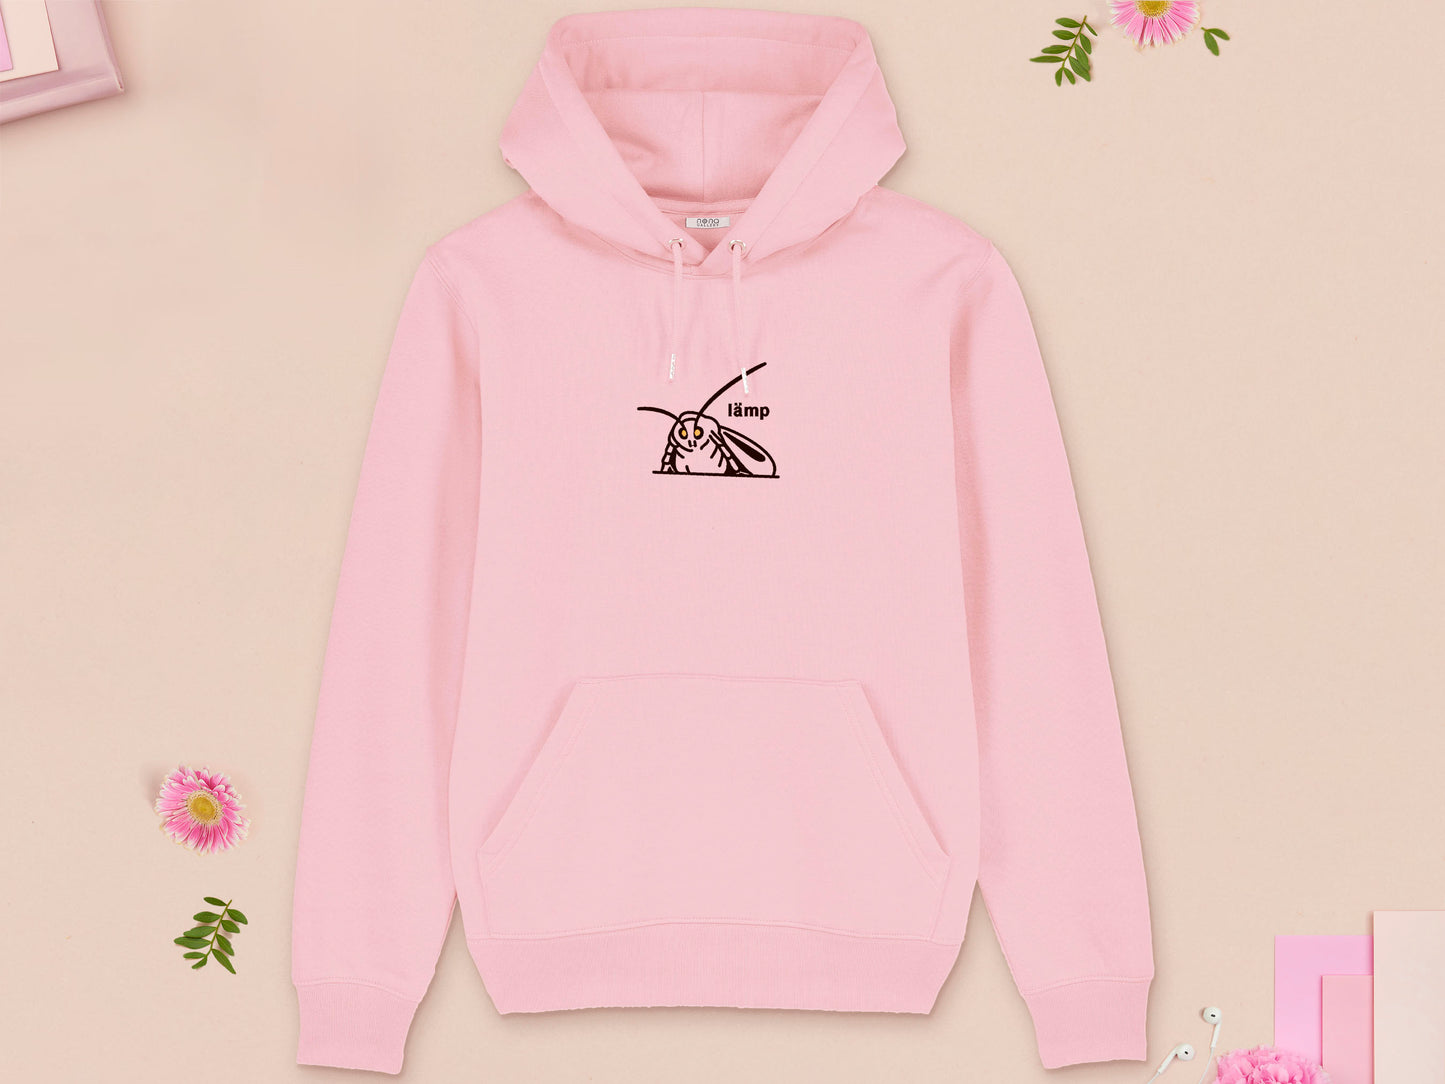 A pink long sleeve fleece hoodie, with an embroidered brown thread design of a moth with glowing yellow eyes and the word lämp